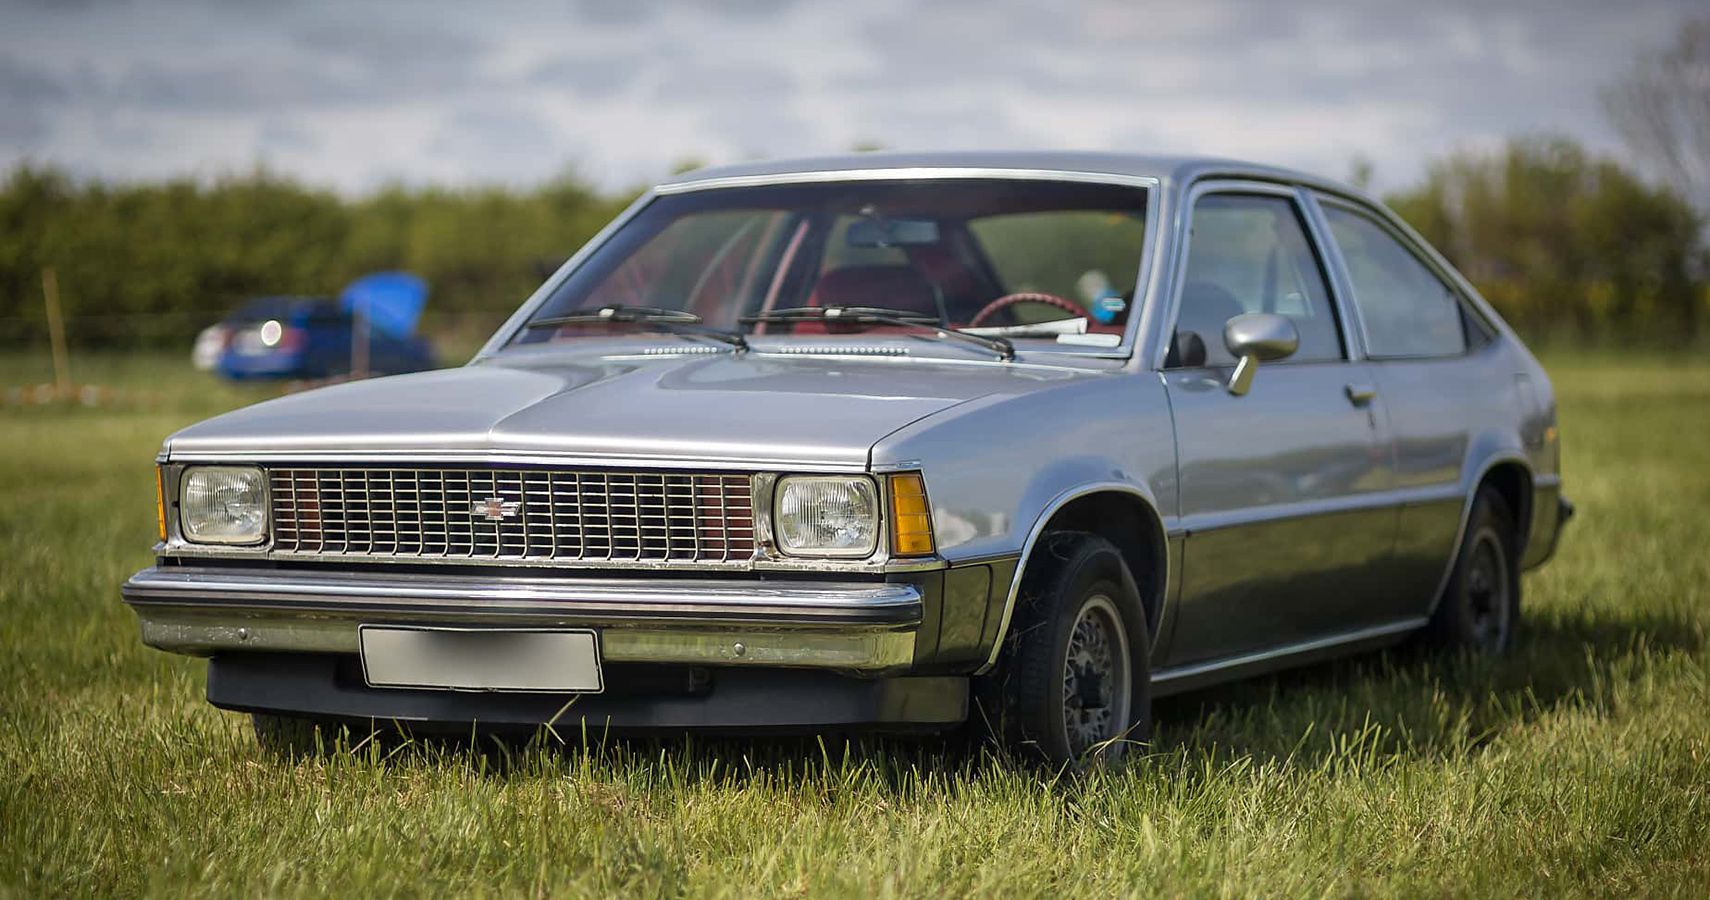 The Chevrolet Citation Came In 1980, Along With The Other X-Body Cars, And The Citation Sold In Droves